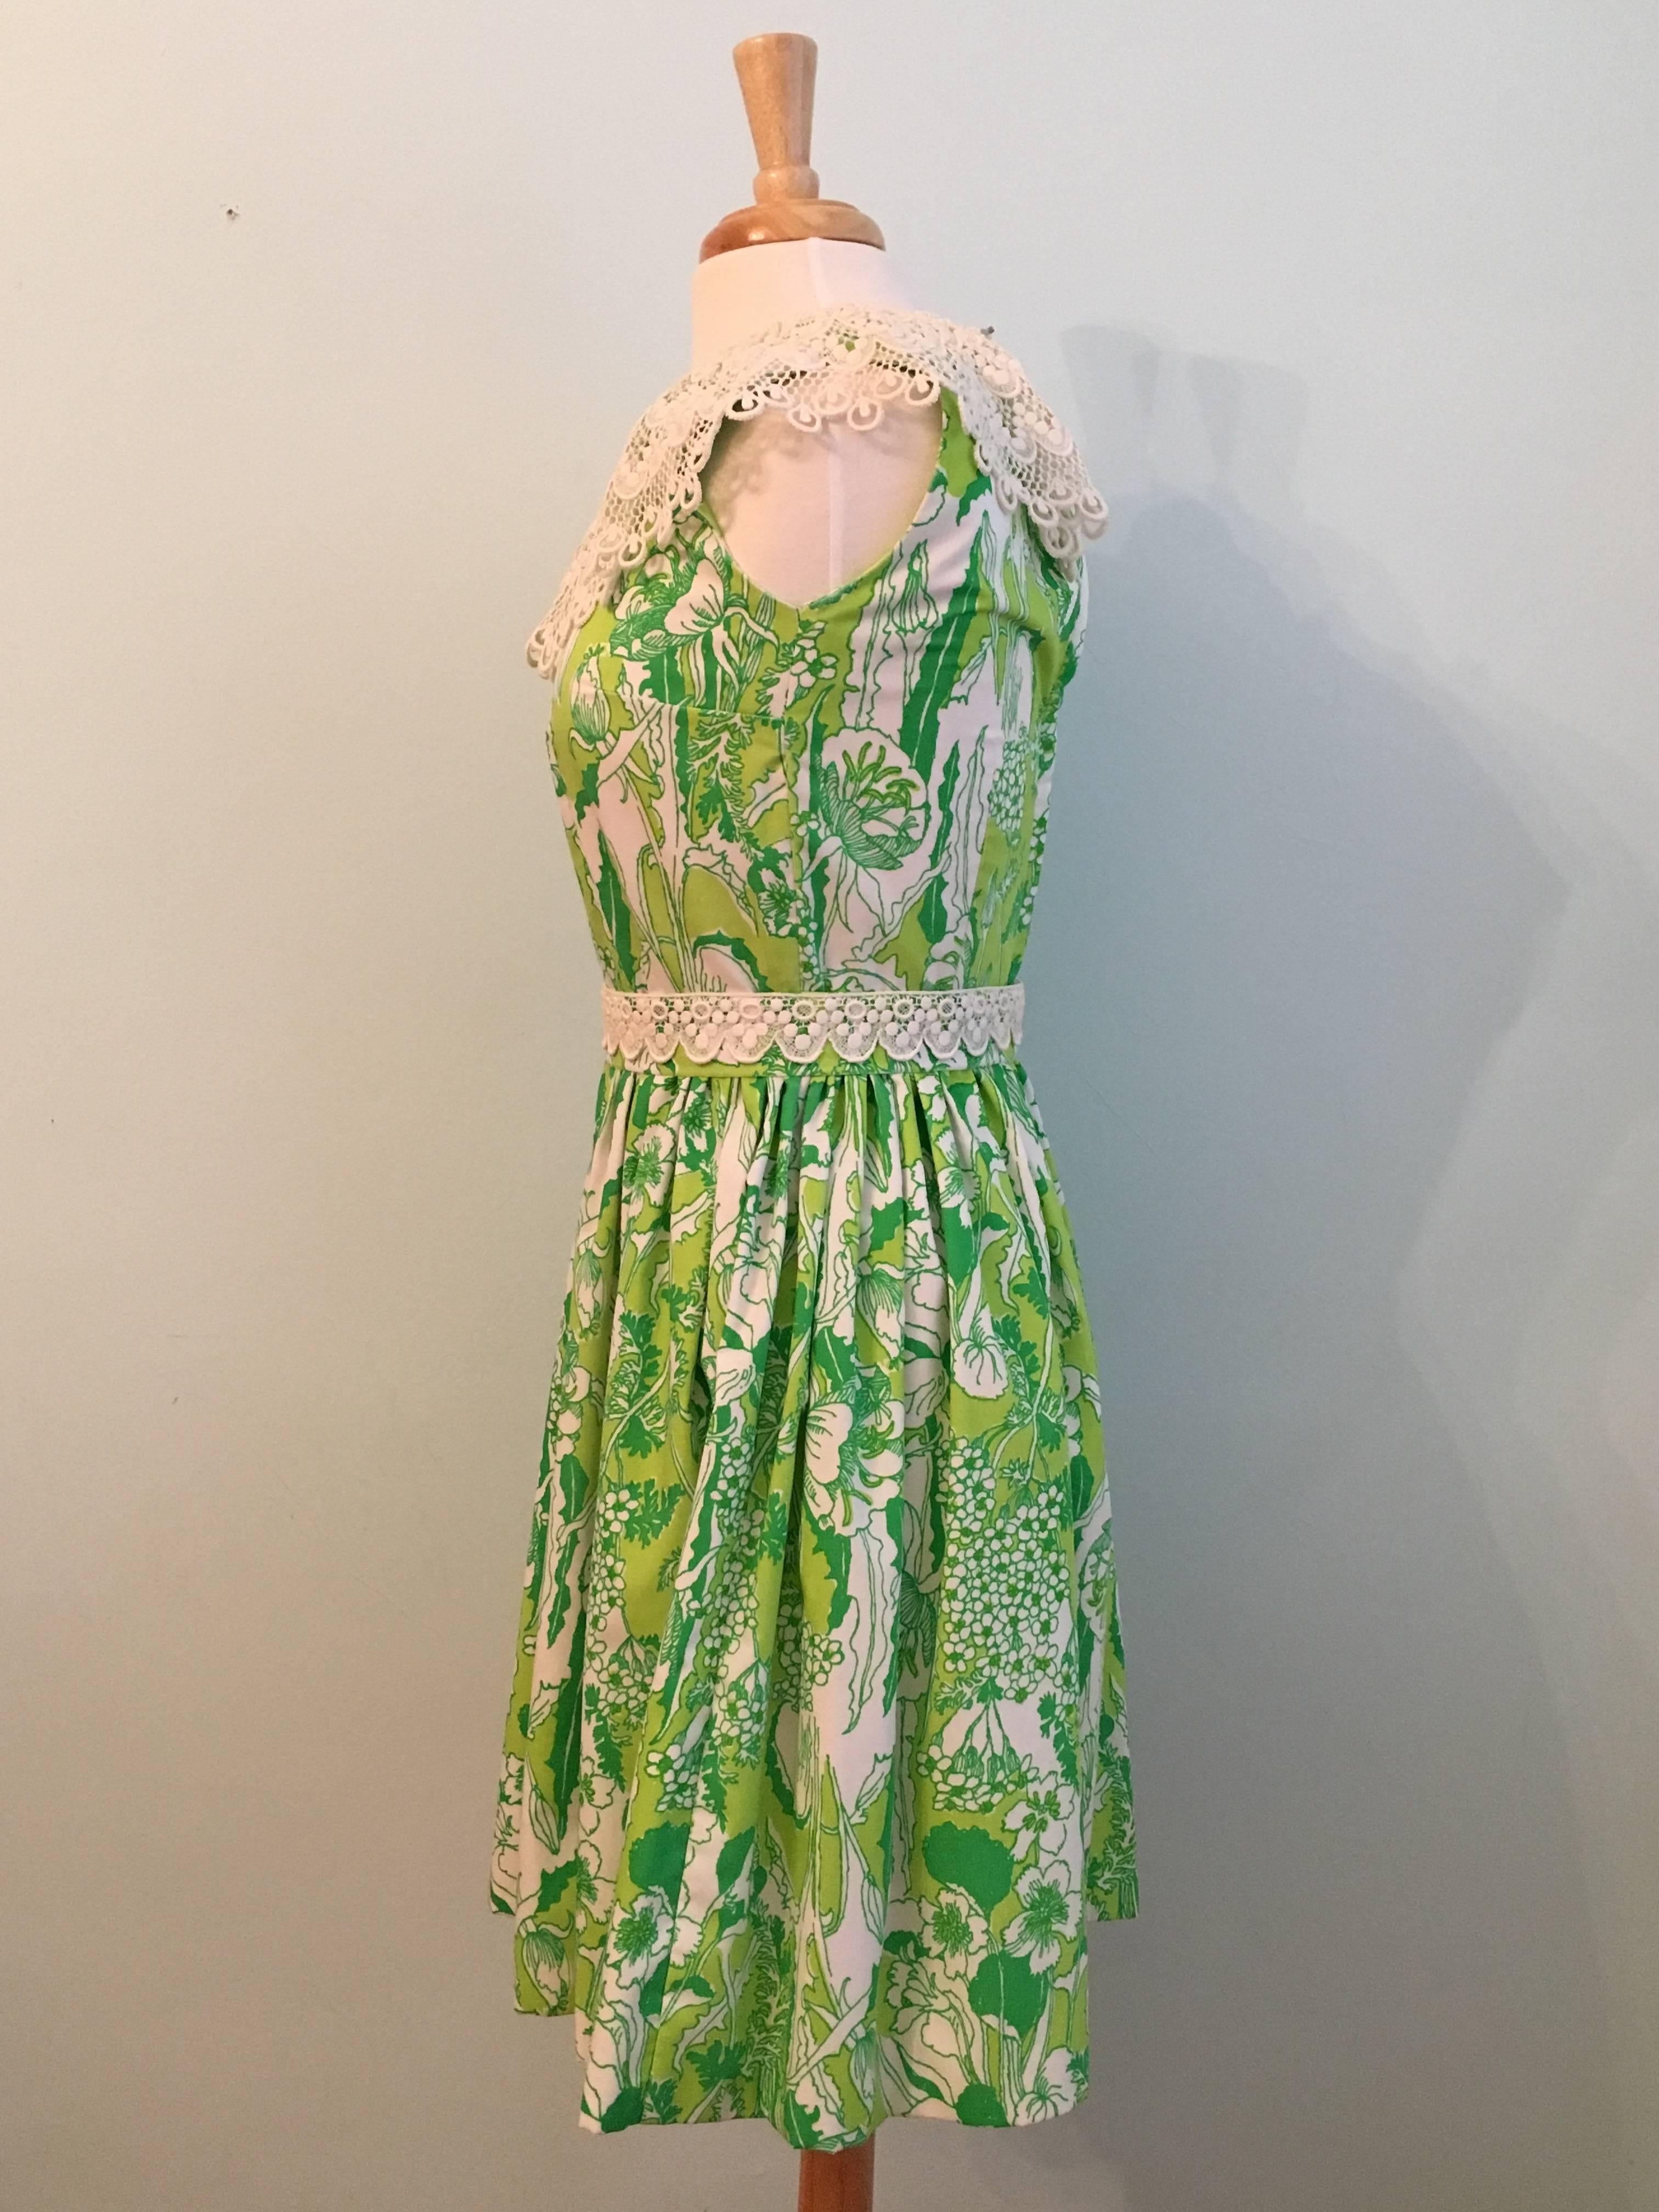 This is an amazing, rare 1960s dress from Lilly Pulitzer. There is no size tag on the dress but it appears to be about a size 4. The bust measures 34